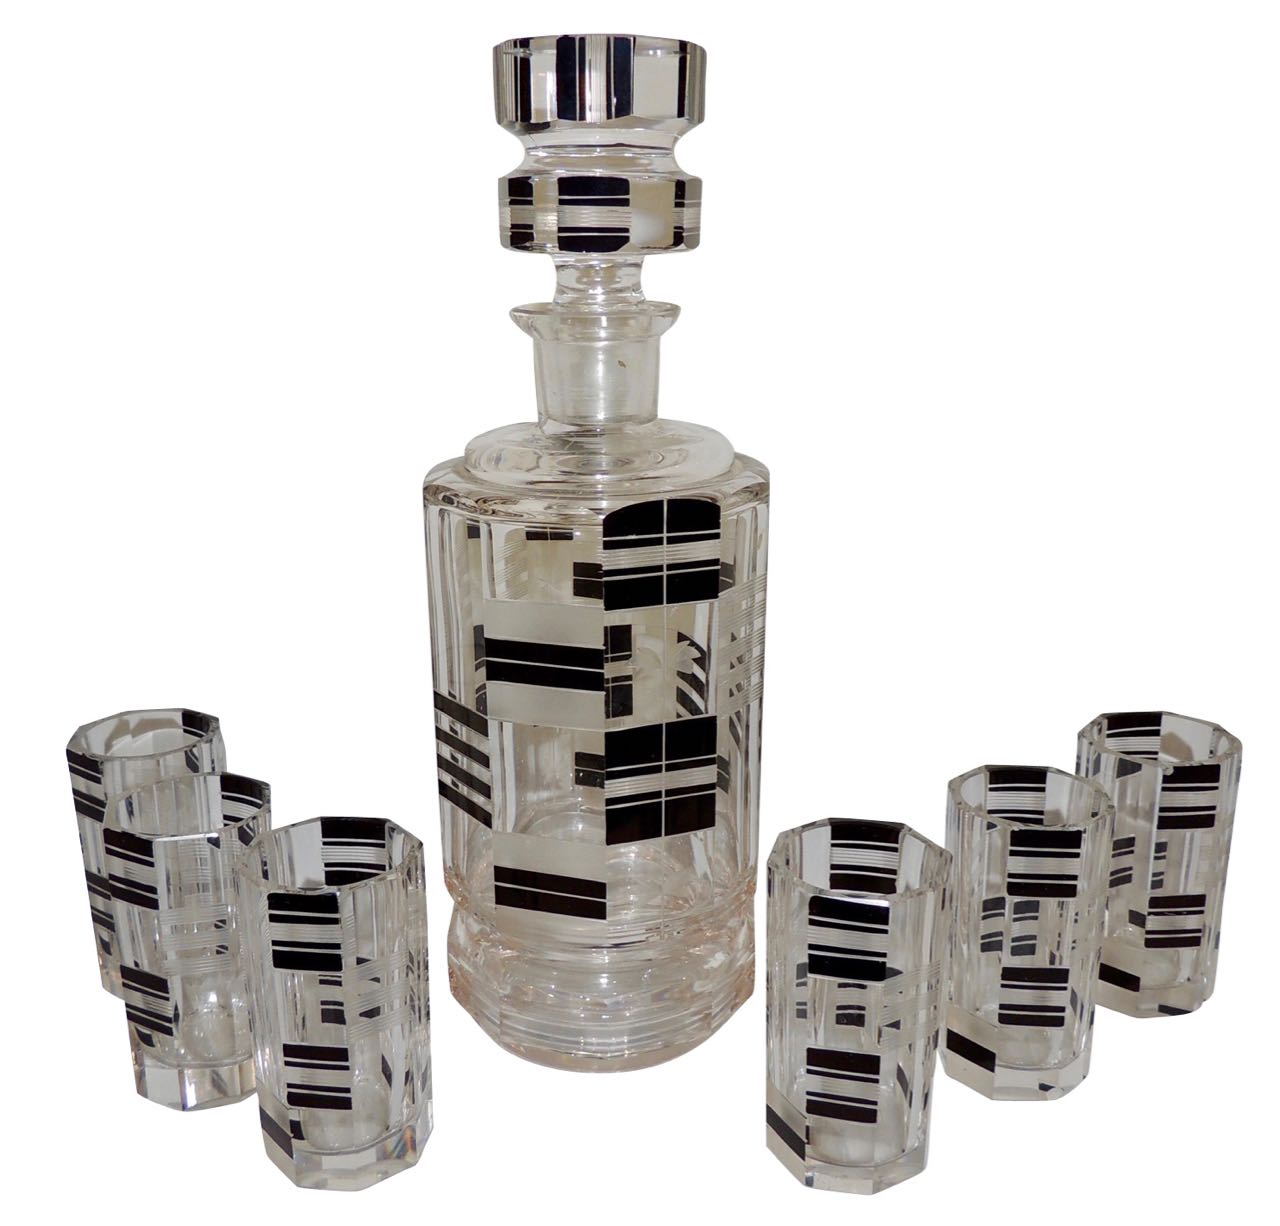  Art Deco Czech Decanter and Glasses